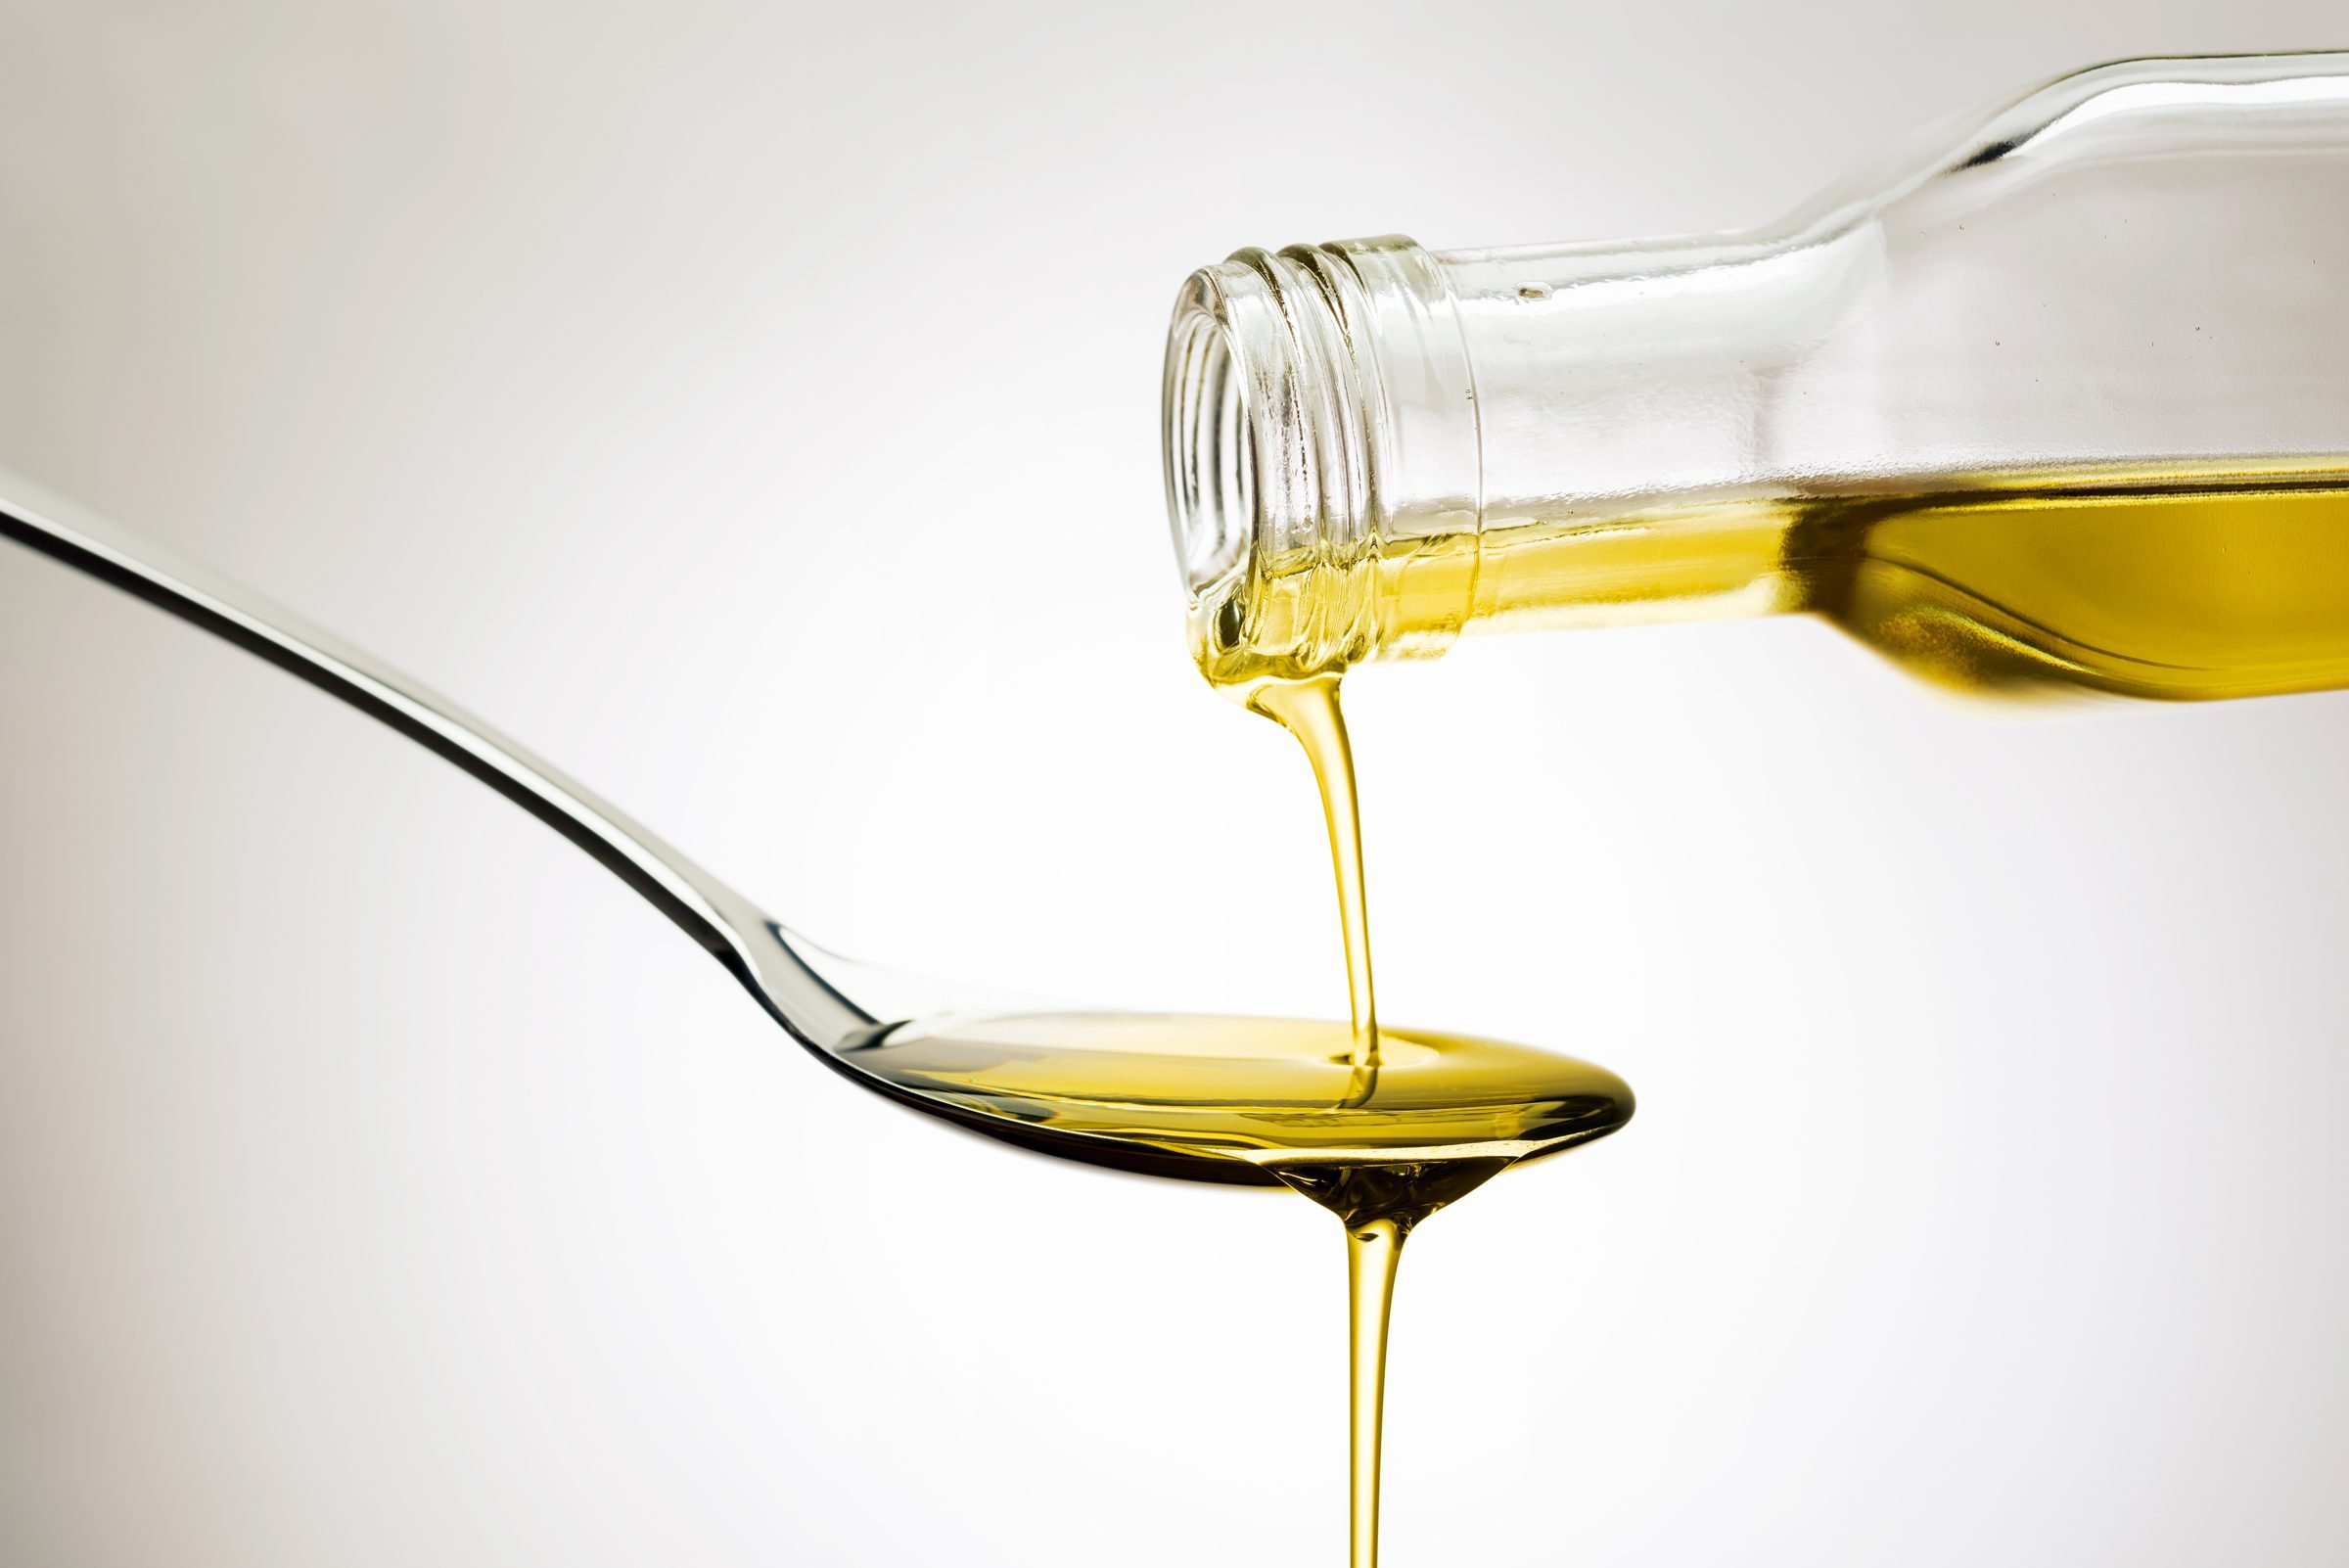 More Than 2,000 Cases of a Popular Cooking Oil Have Been Recalled